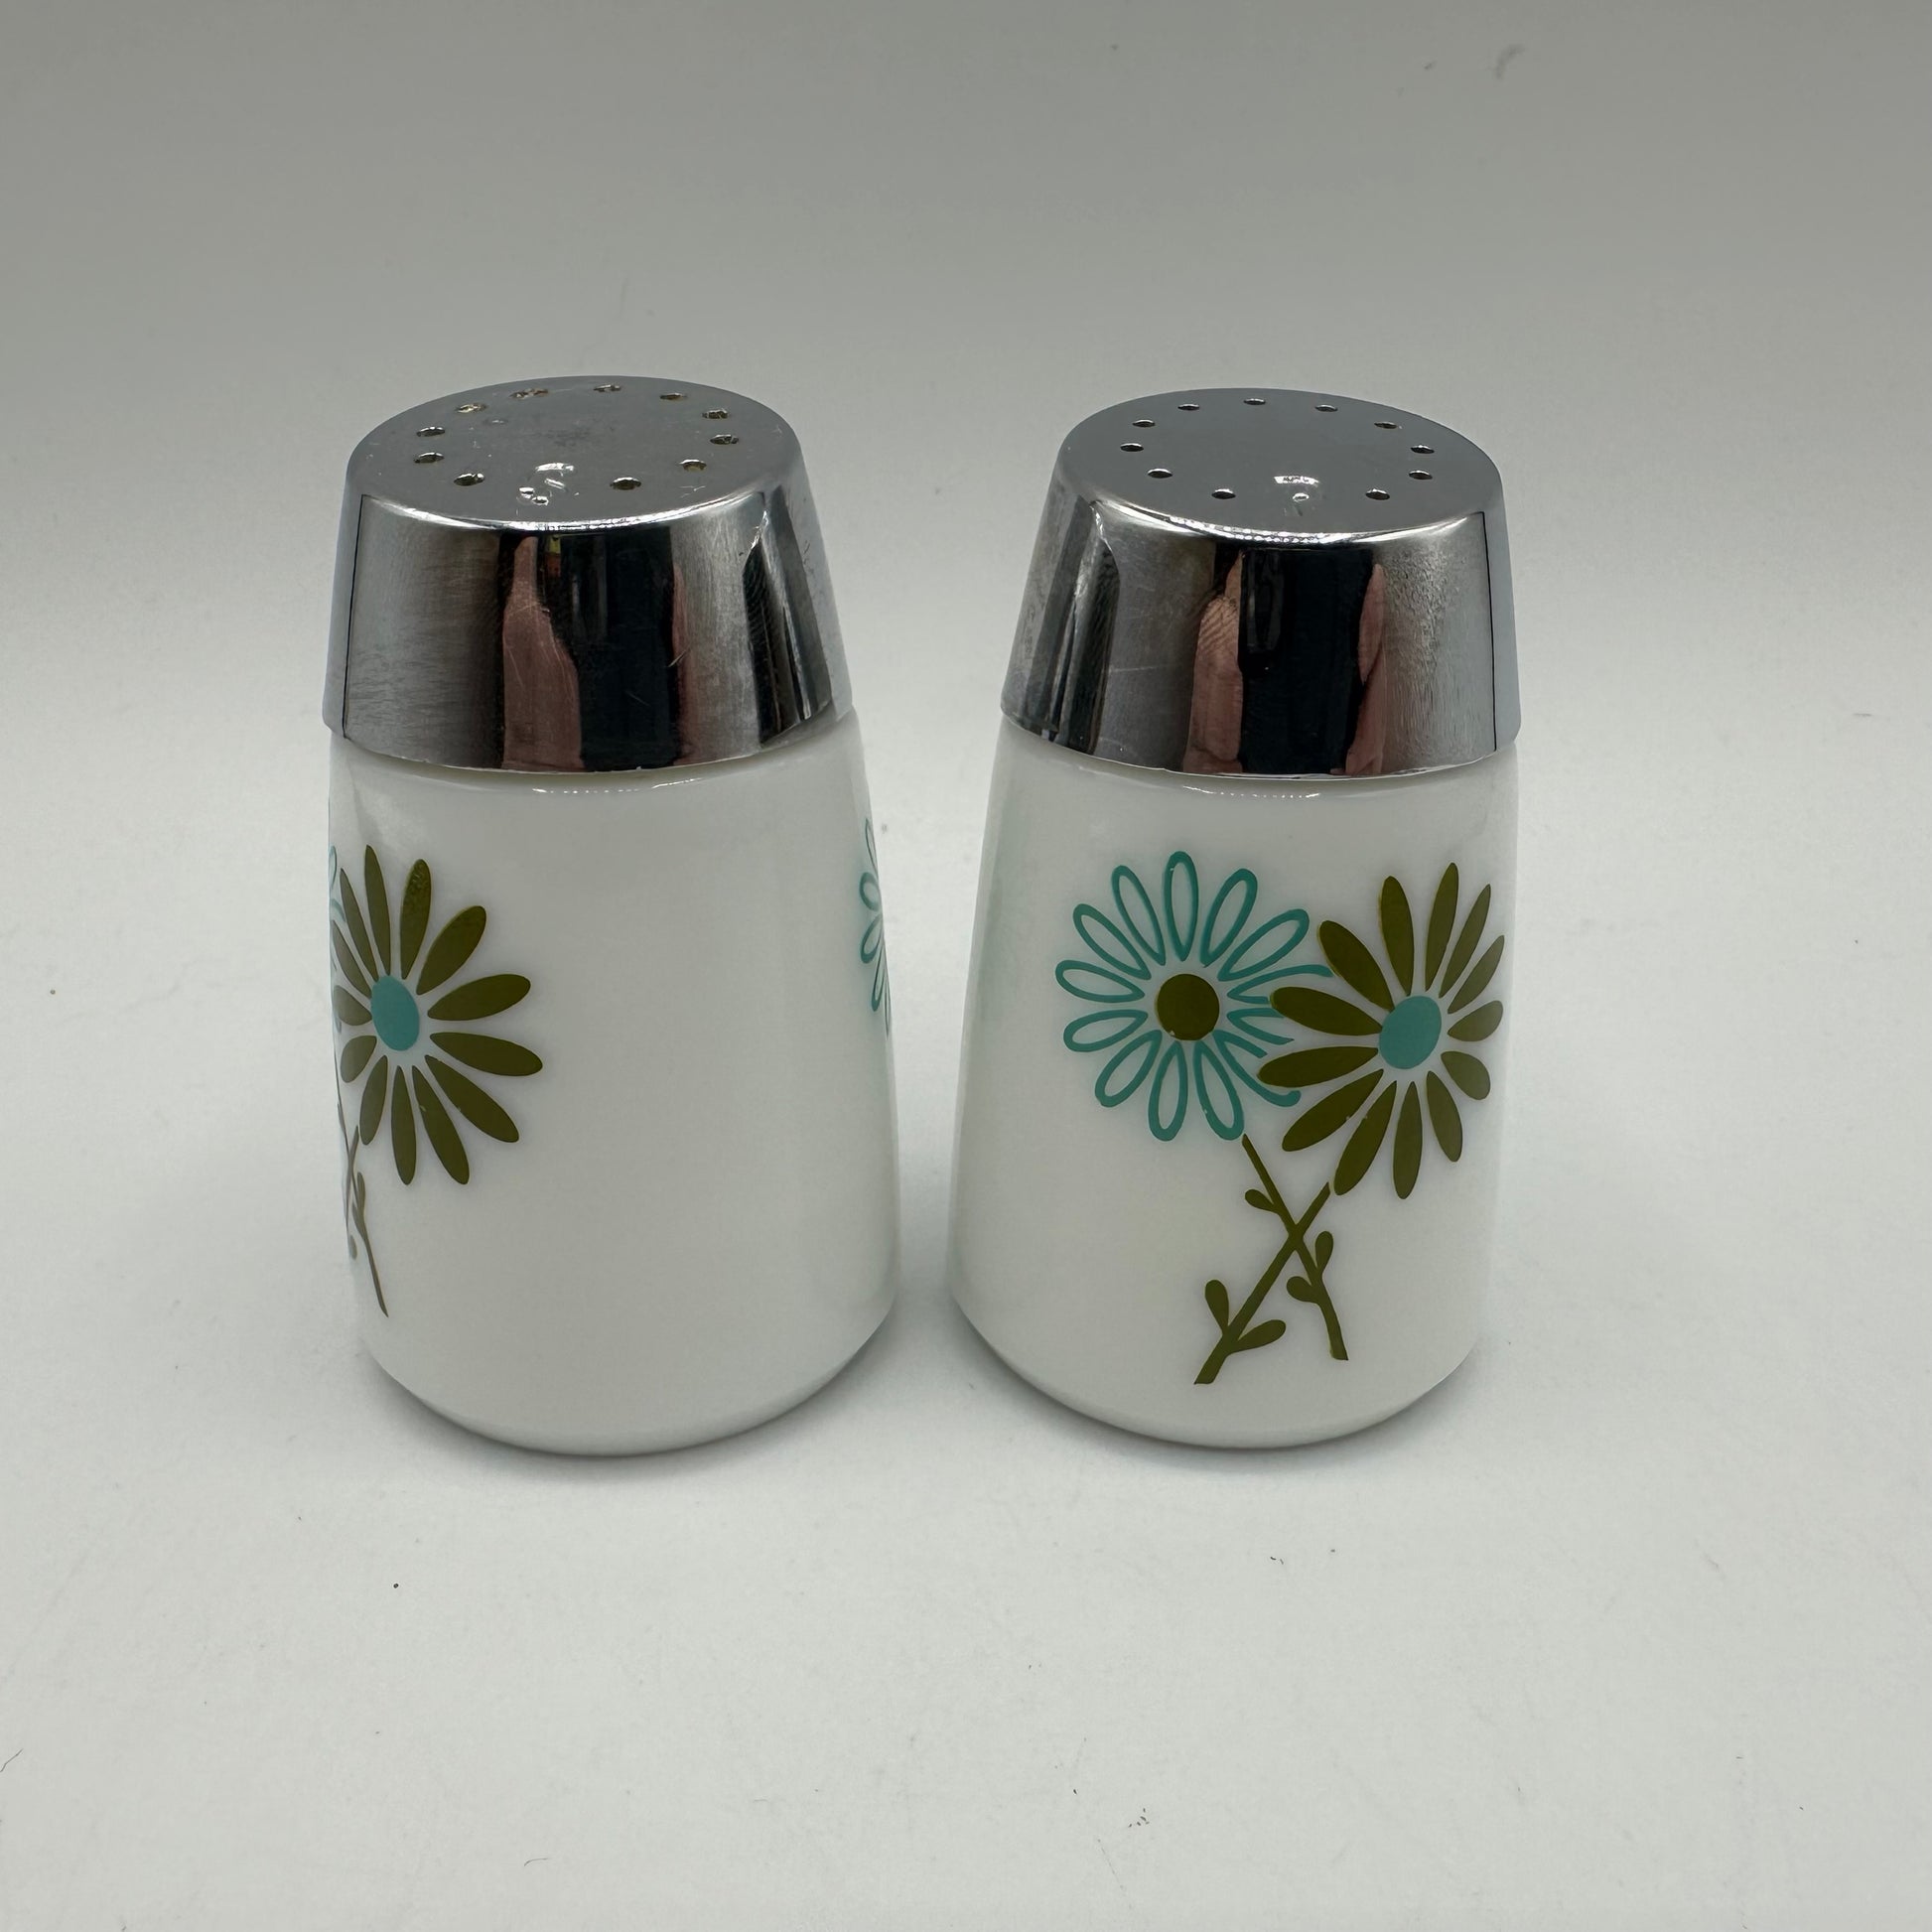 Strawberry Salt & Pepper Shakers, Vintage 3 Piece Metal and Glass Shakers 